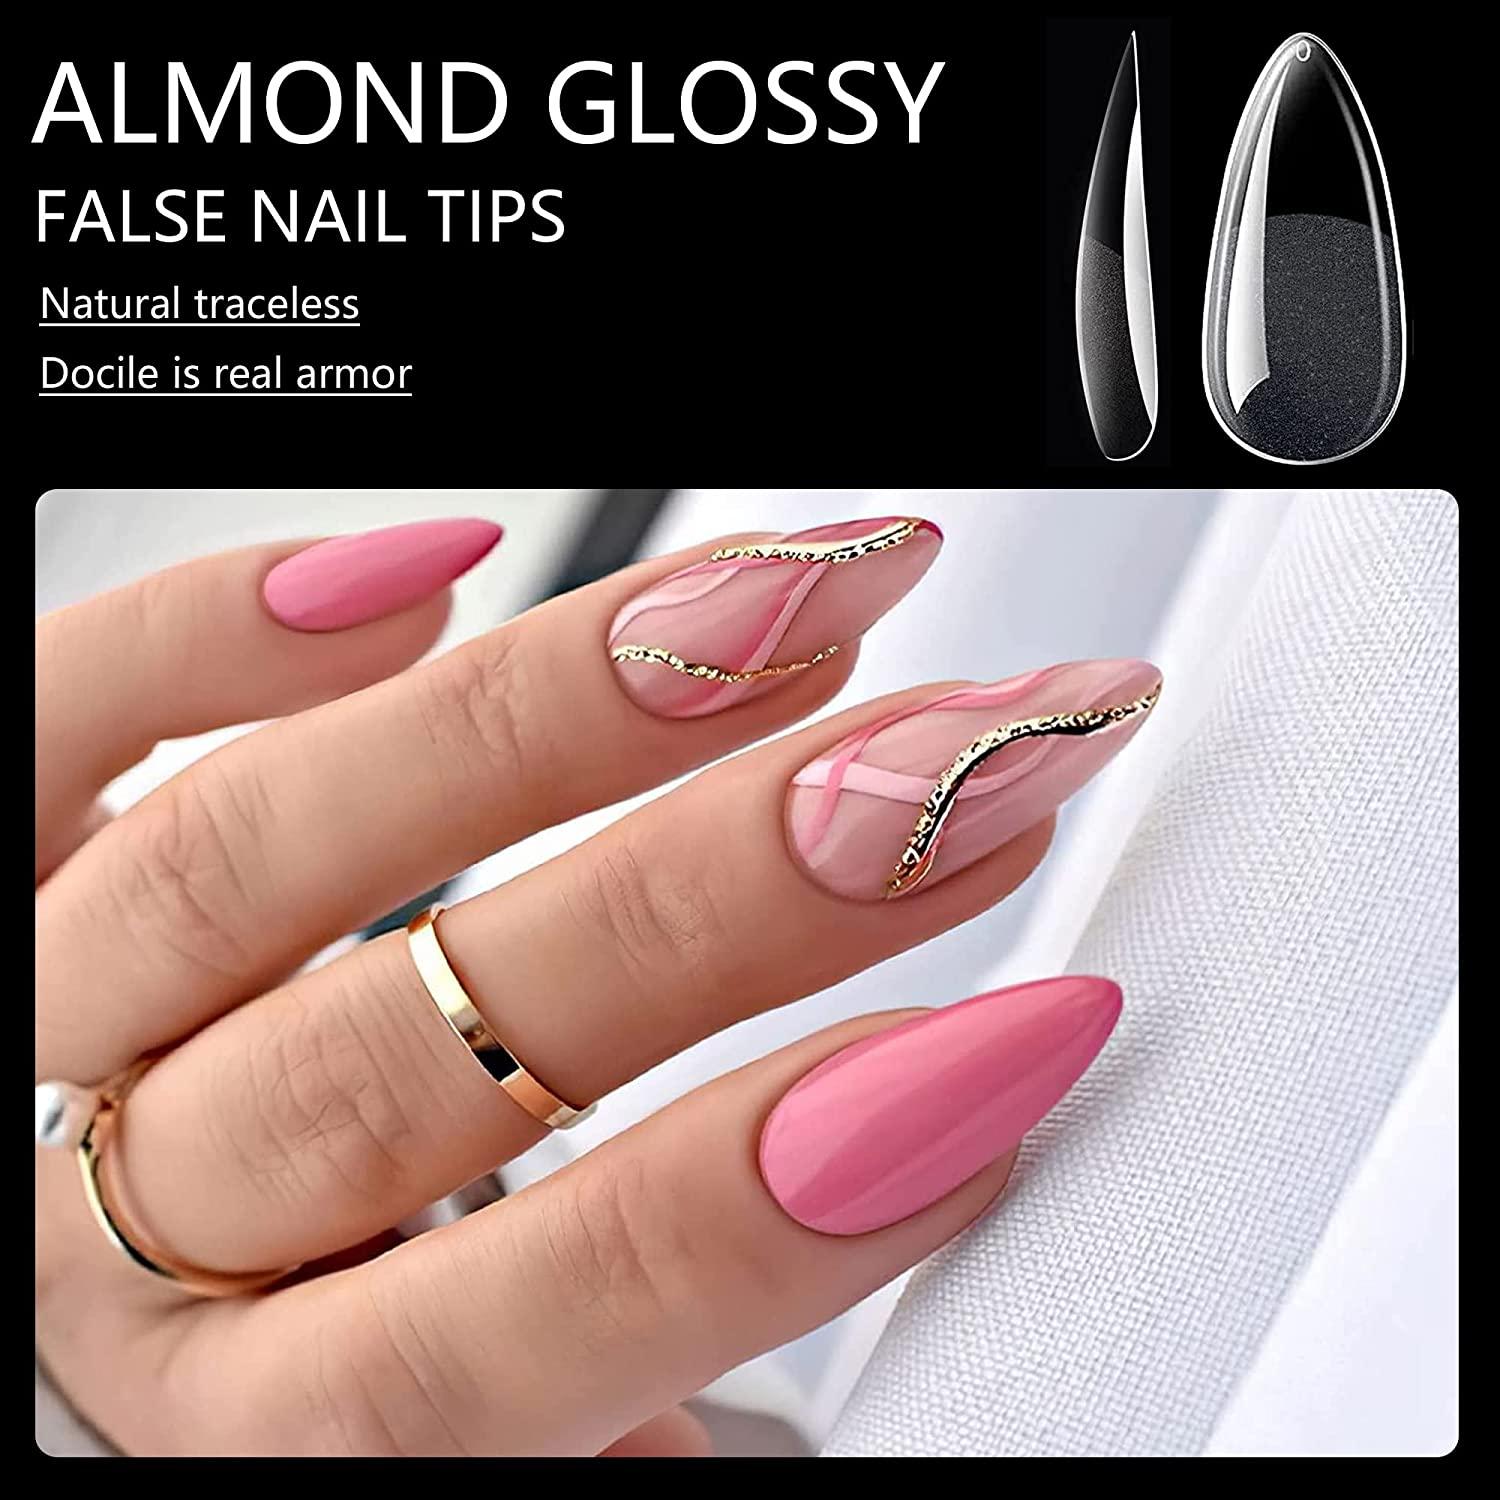 27 Almond Shaped Nail Art Ideas to Inspire Your Next Manicure | Allure